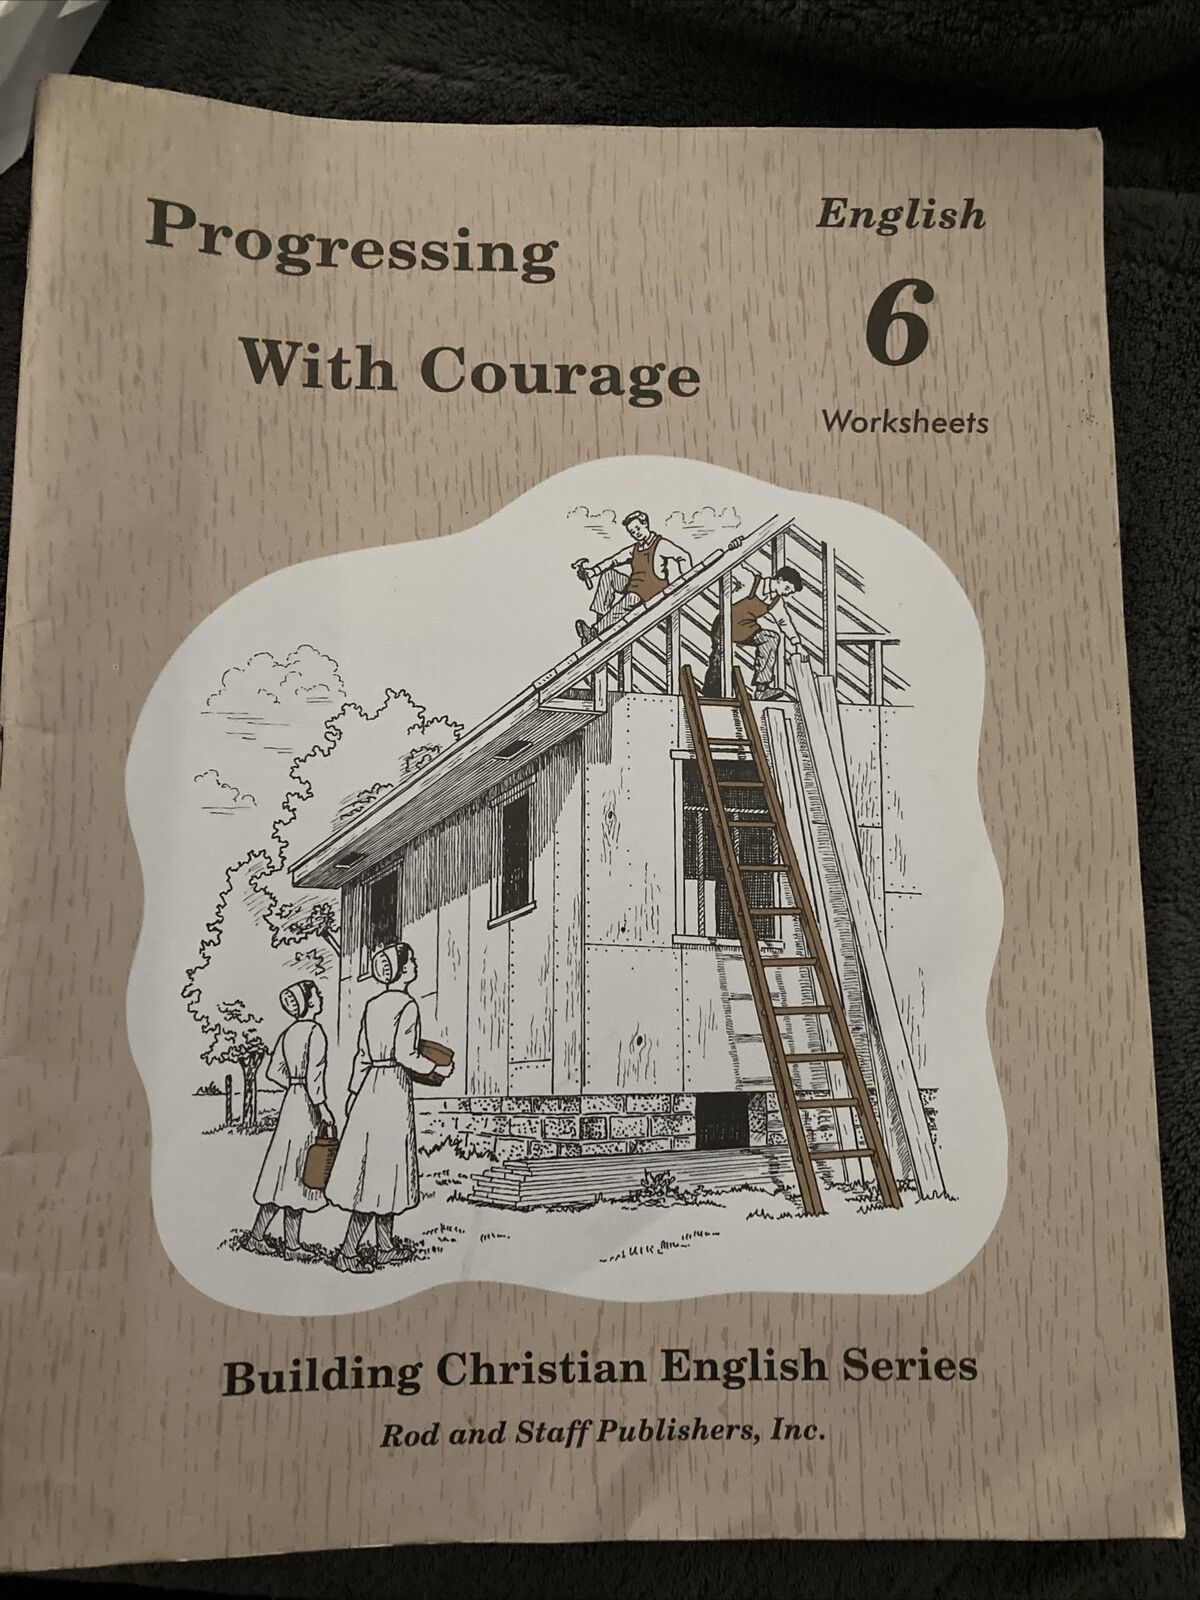 English 6 - Progressing with Courage - Student Worksheets